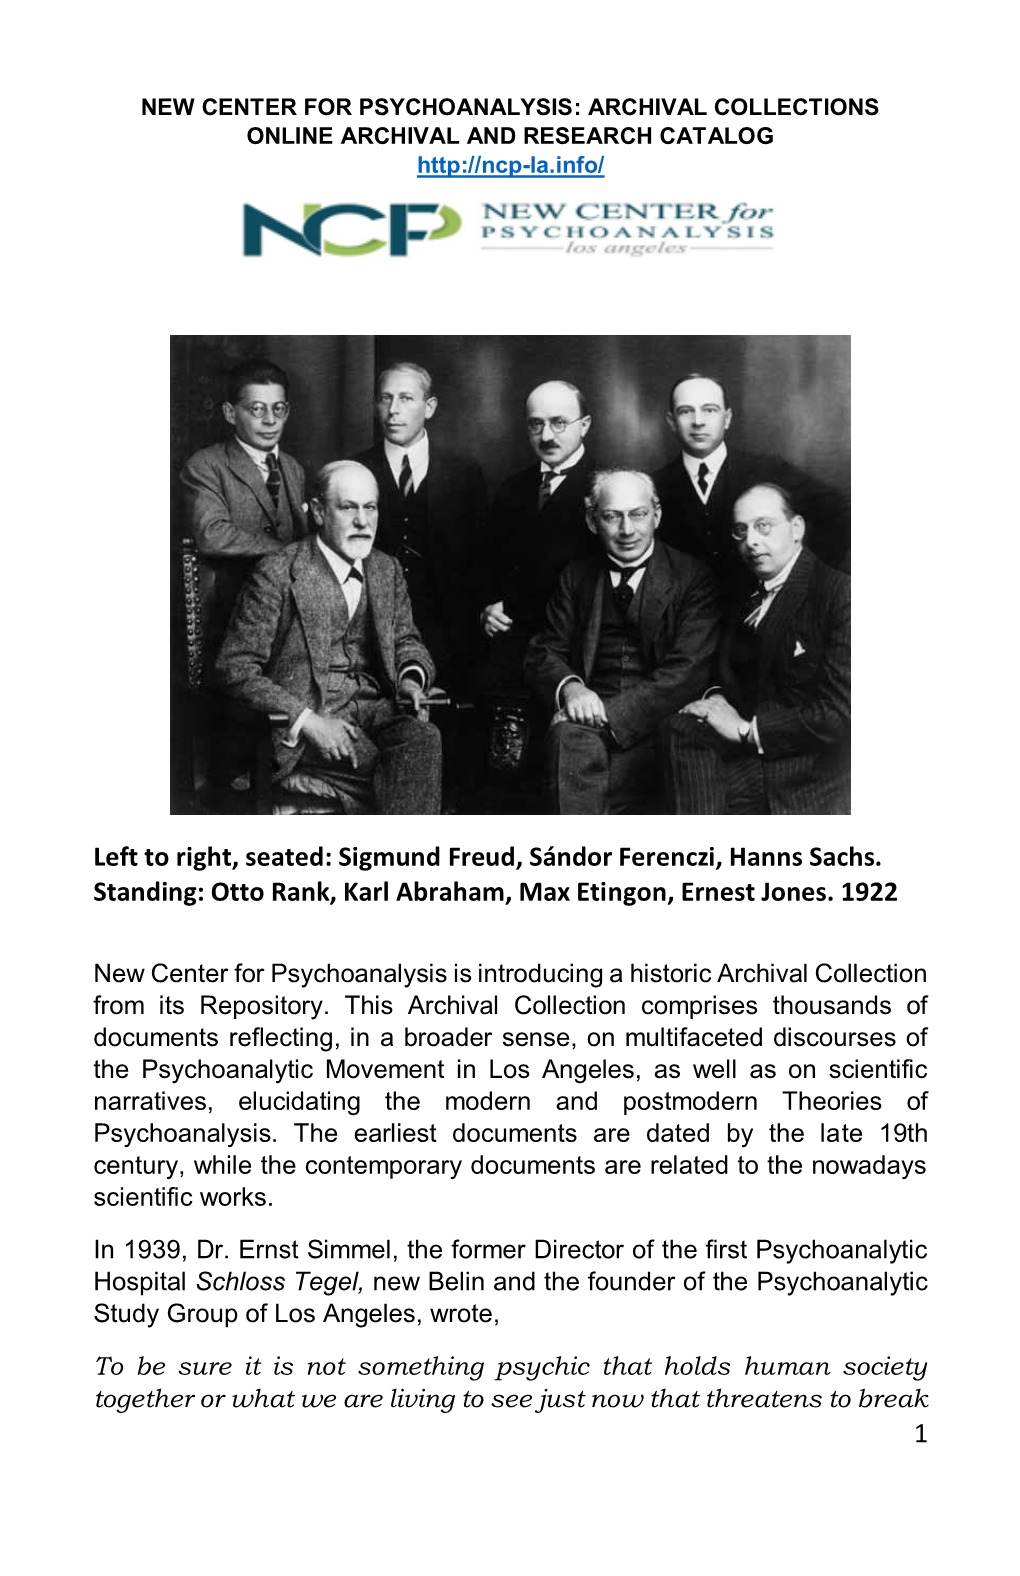 1 Left to Right, Seated: Sigmund Freud, Sándor Ferenczi, Hanns Sachs. Standing: Otto Rank, Karl Abraham, Max Etingon, Ernest Jo